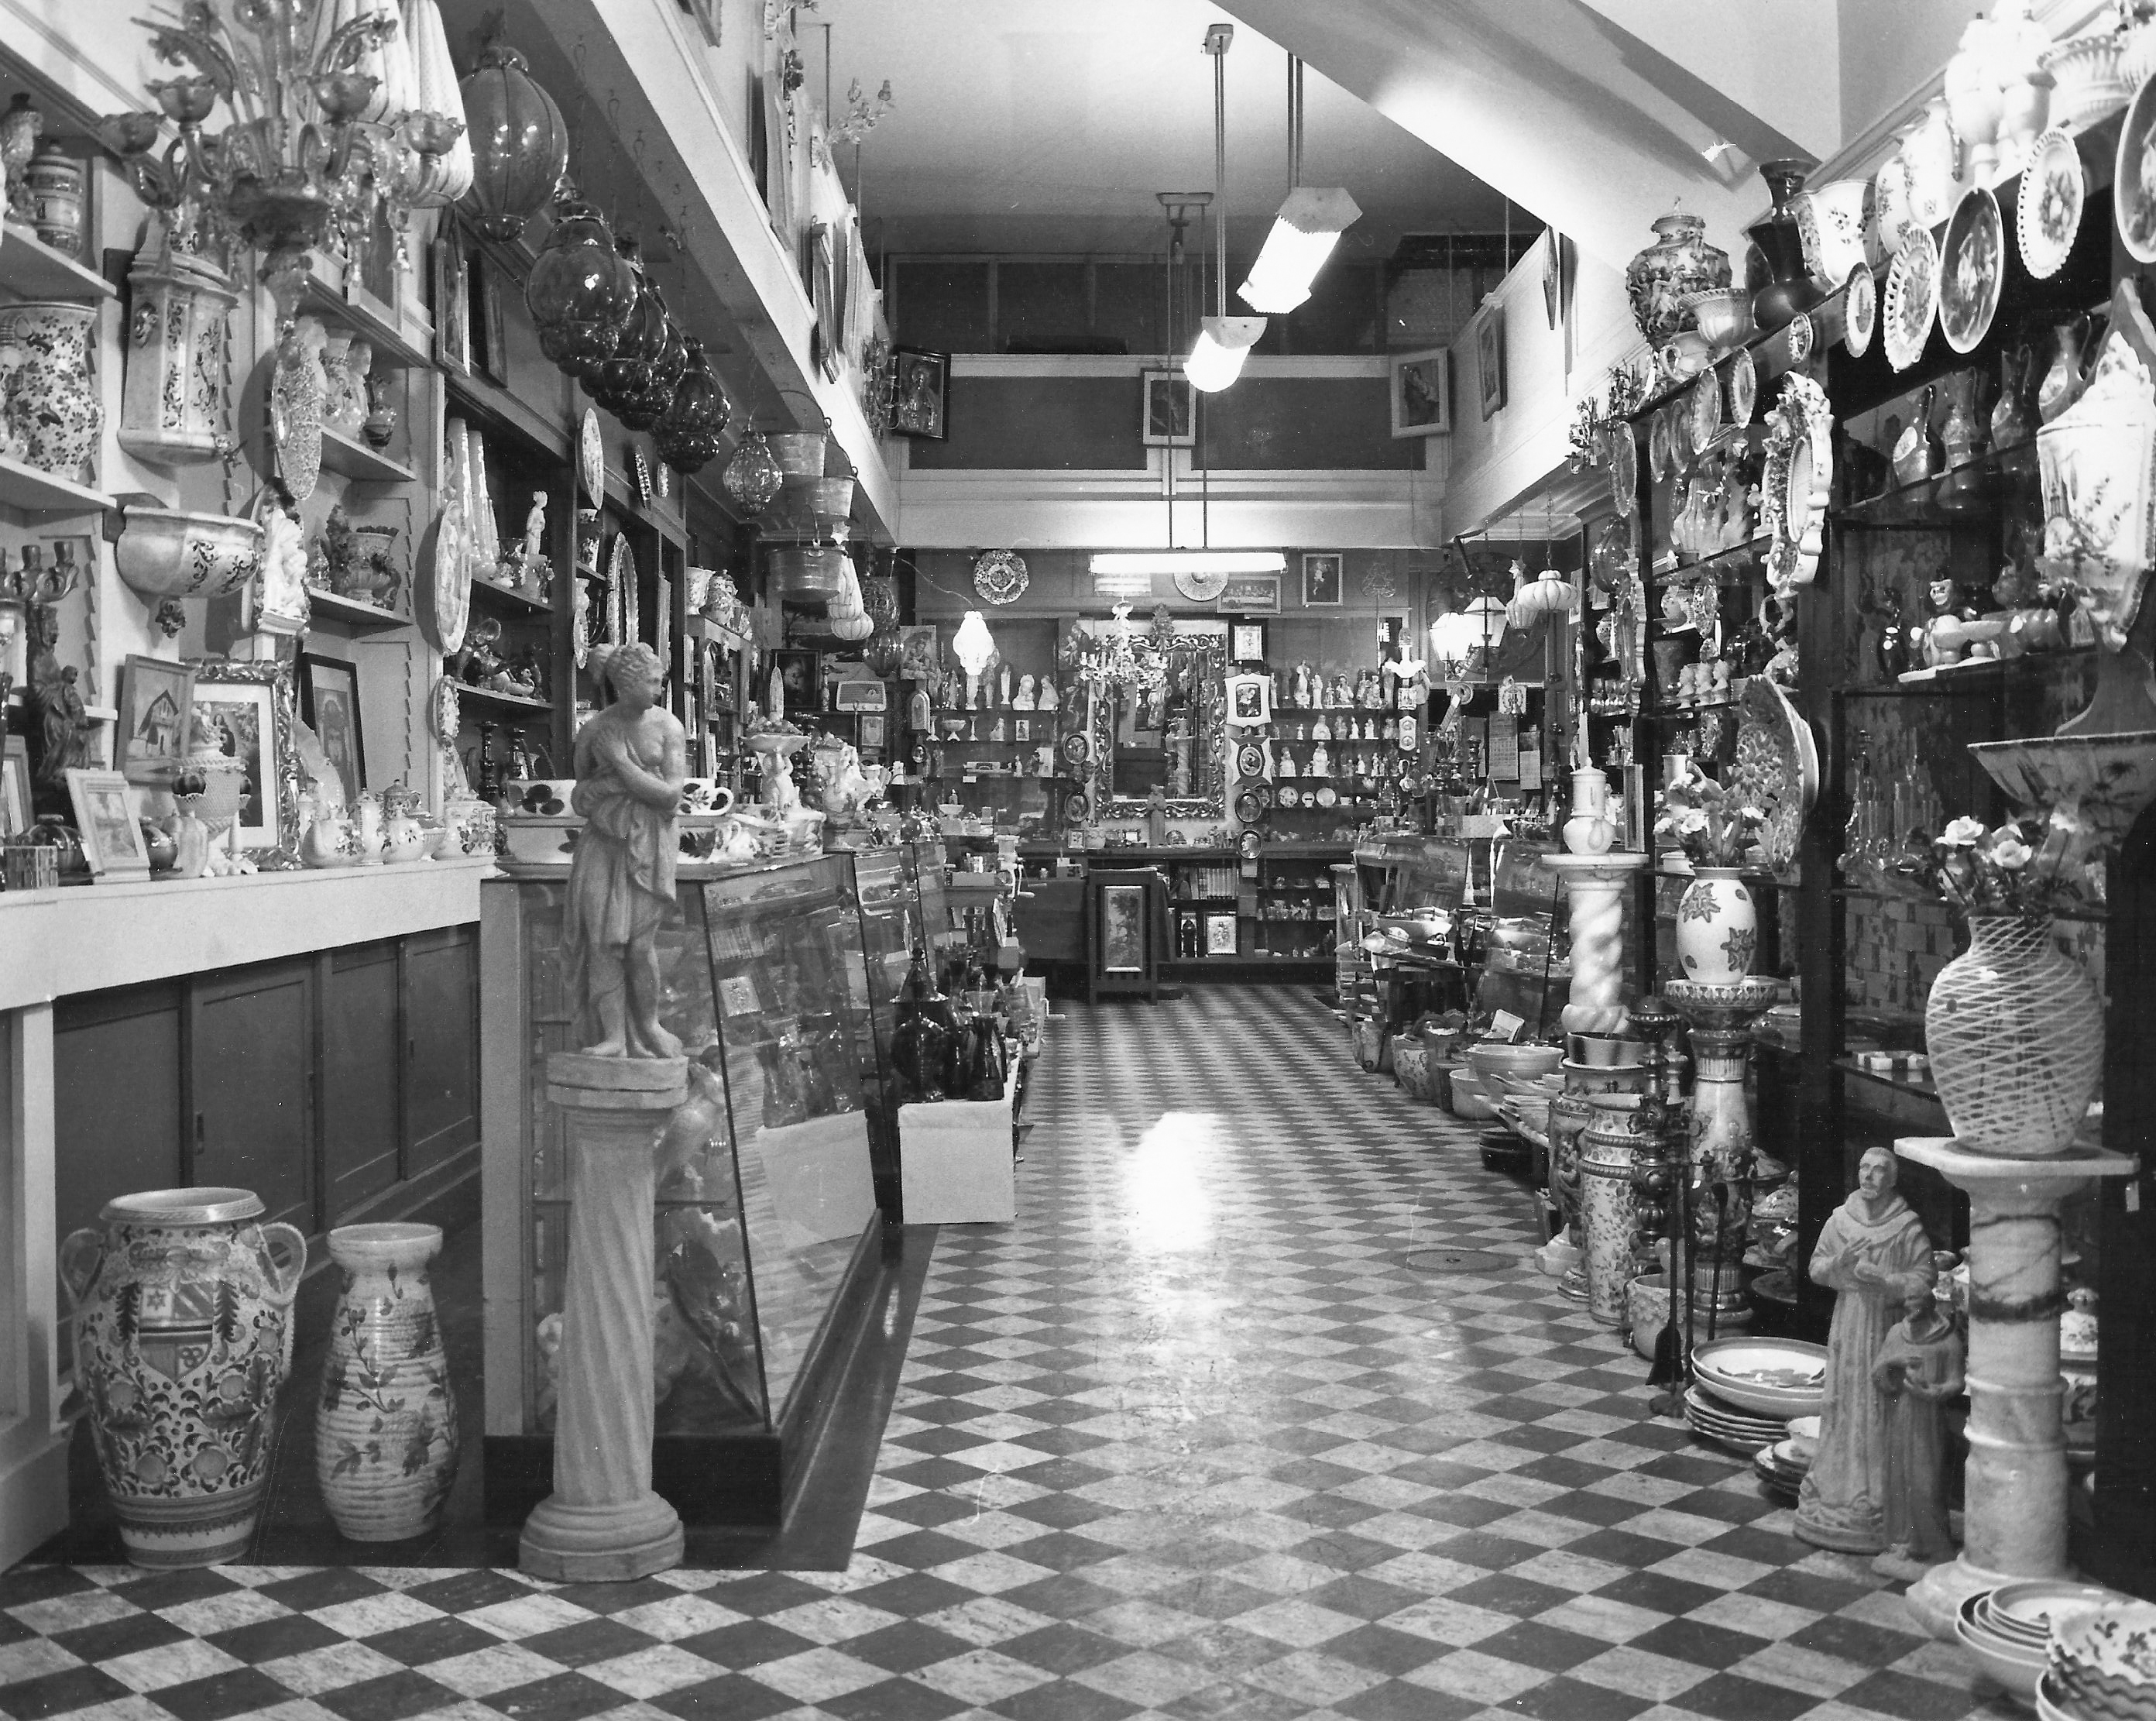 Biordi Art Imports | The early days of this iconic treasure in North Beach, San Francisco.